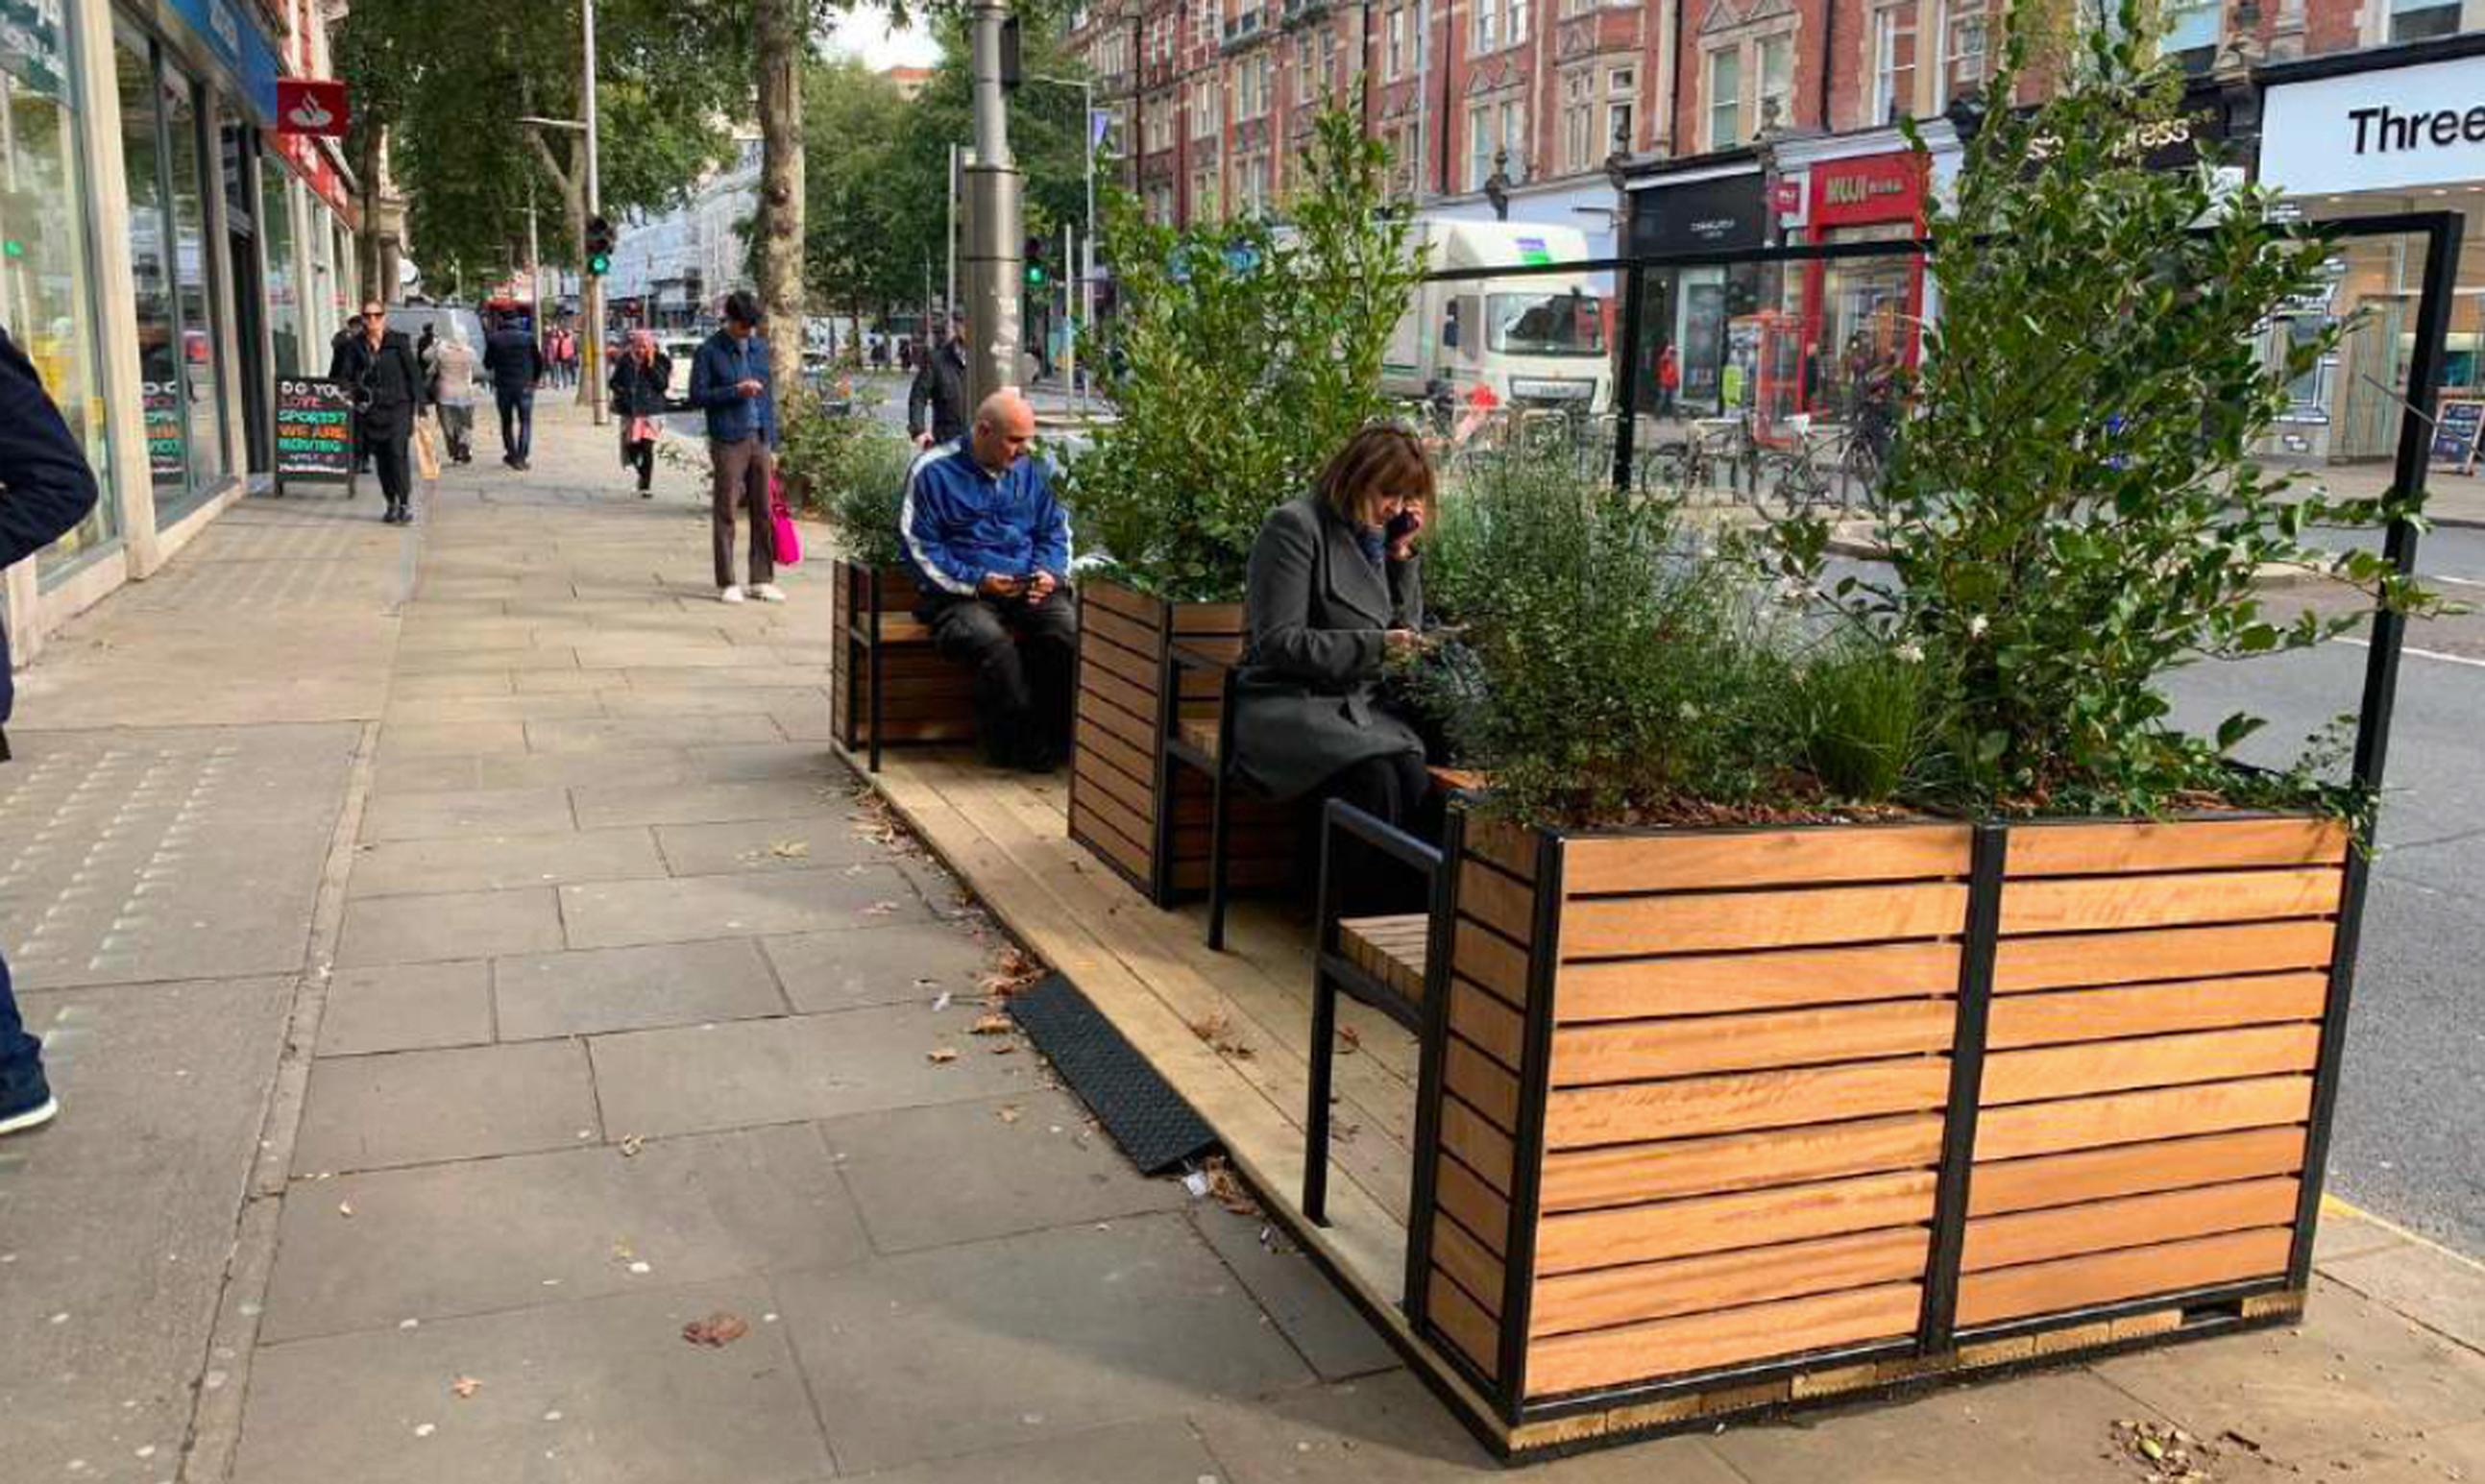 The Business and Planning Act 2020 supports cafes, pubs and restaurants by introducing a temporary fast-track process for pavement licences. Image: Meristem Design